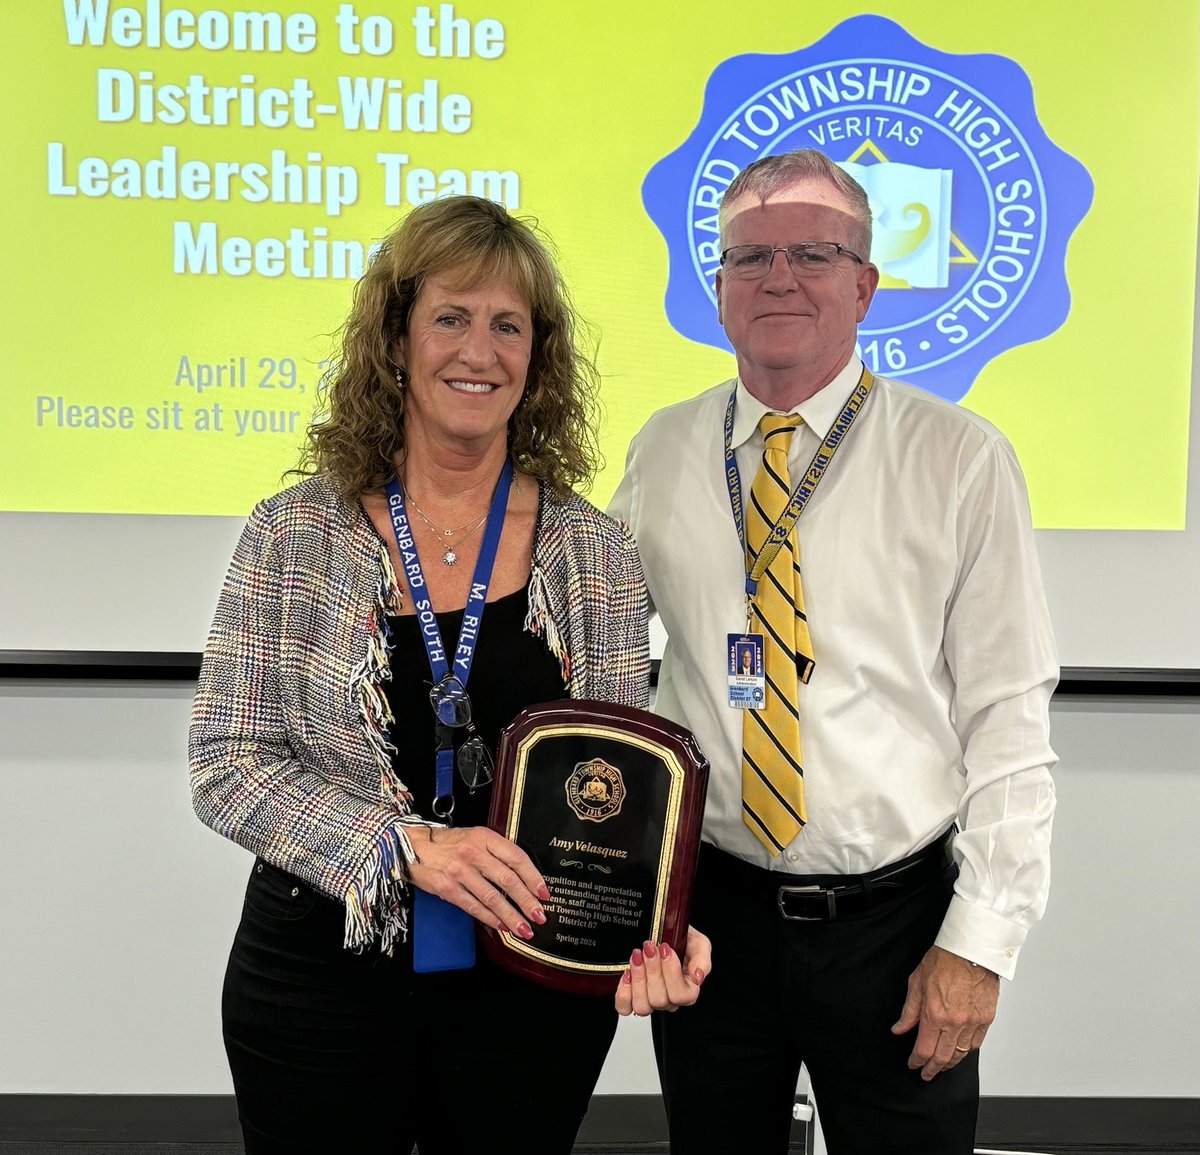 Great to recognize Amy Velazquez, legendary 14 year veteran dean at Glenbard South, at our District Wide Leadership Team meeting. She will be retiring this year. Firm and consistent, yet personable, caring and compassionate. We will miss Amy!